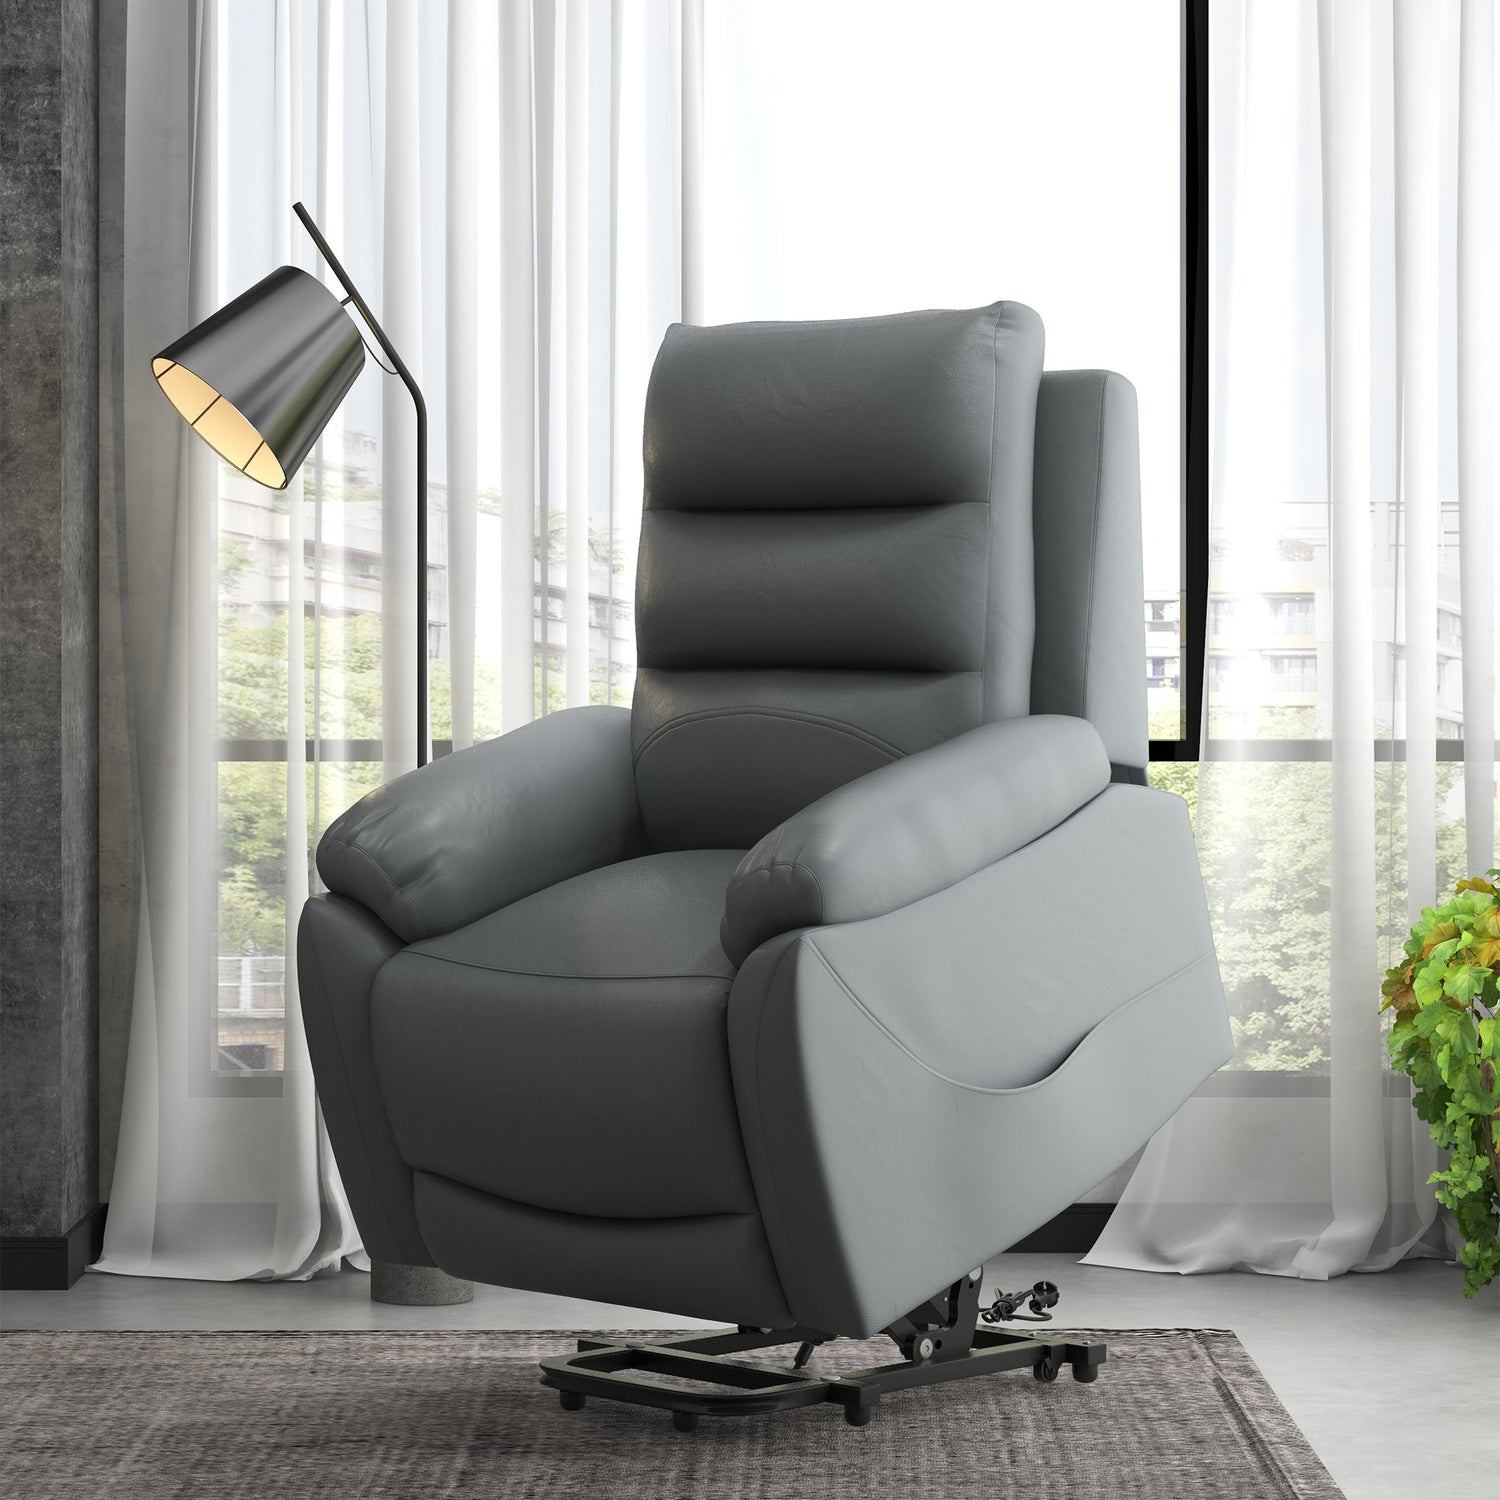 HOMCOM Electric Riser and Recliner Chairs for Elderly, PU Leather